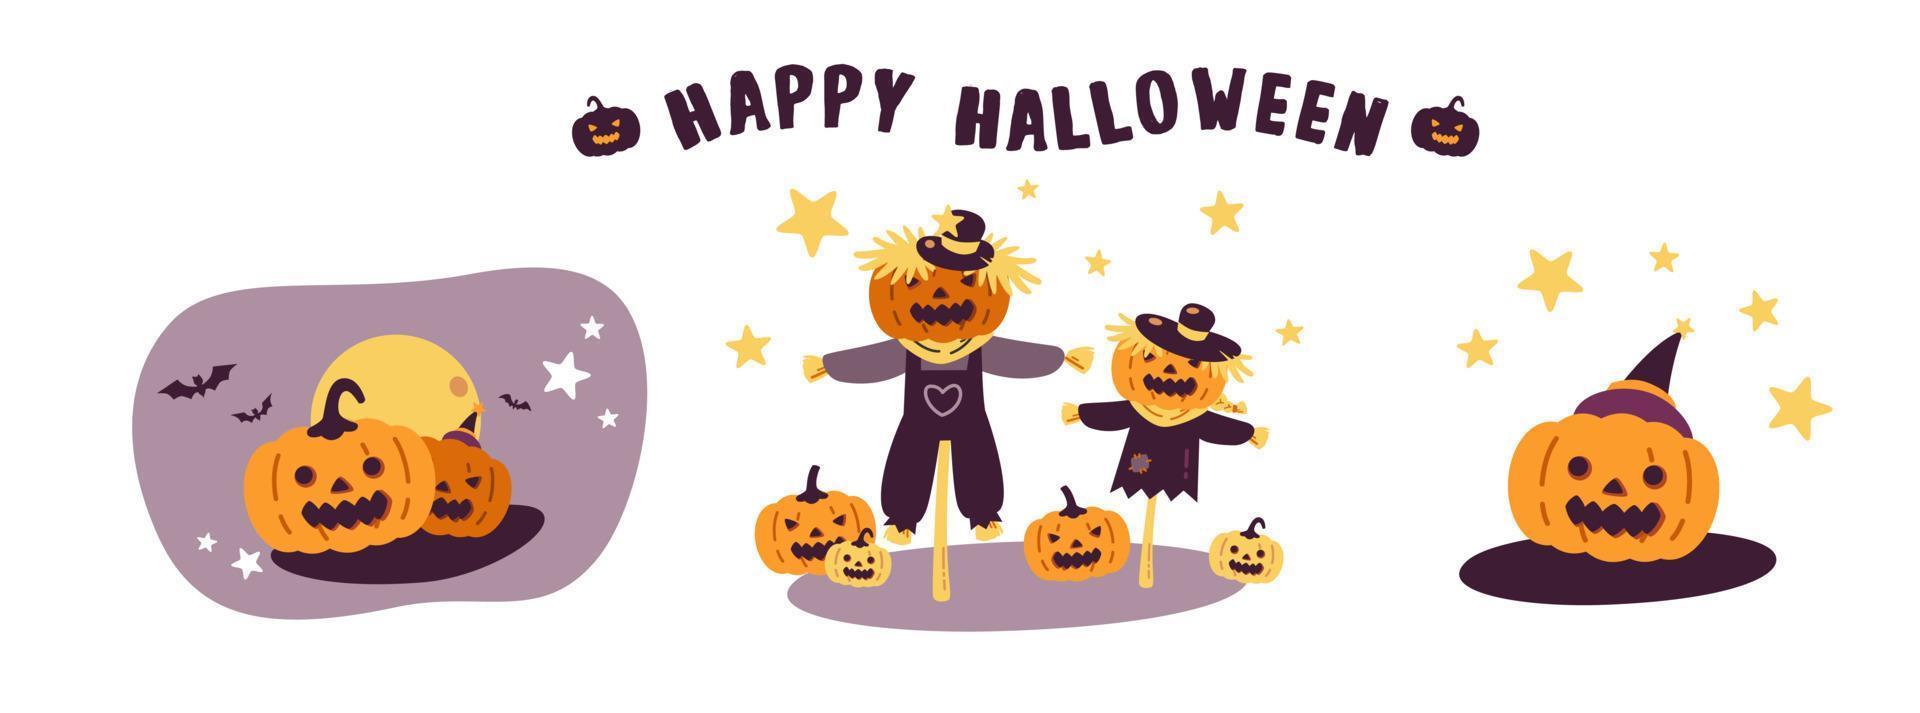 Happy Halloween cartoon character spooky and cute concept flat vector illustration isolated on white background. Cute pumpkins, scarecrows, pumpkin with witch's hat.